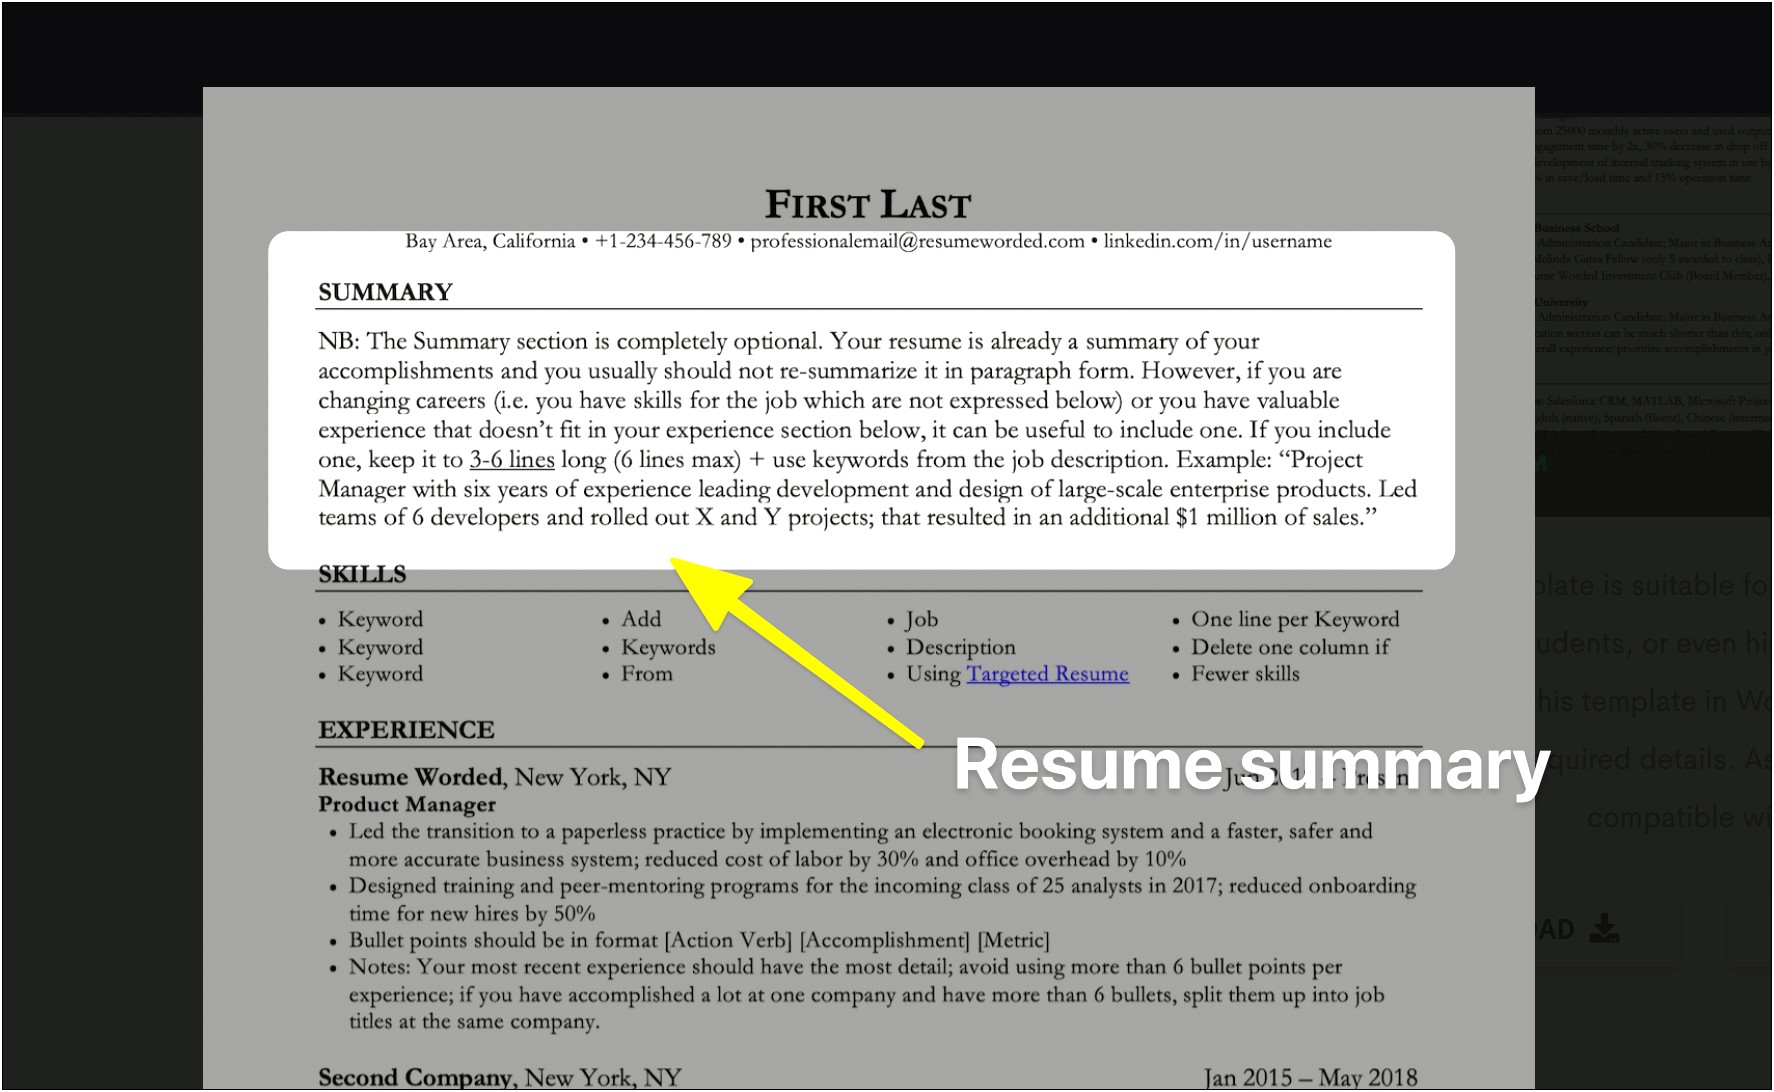 Career Witching Resume Objective Statements